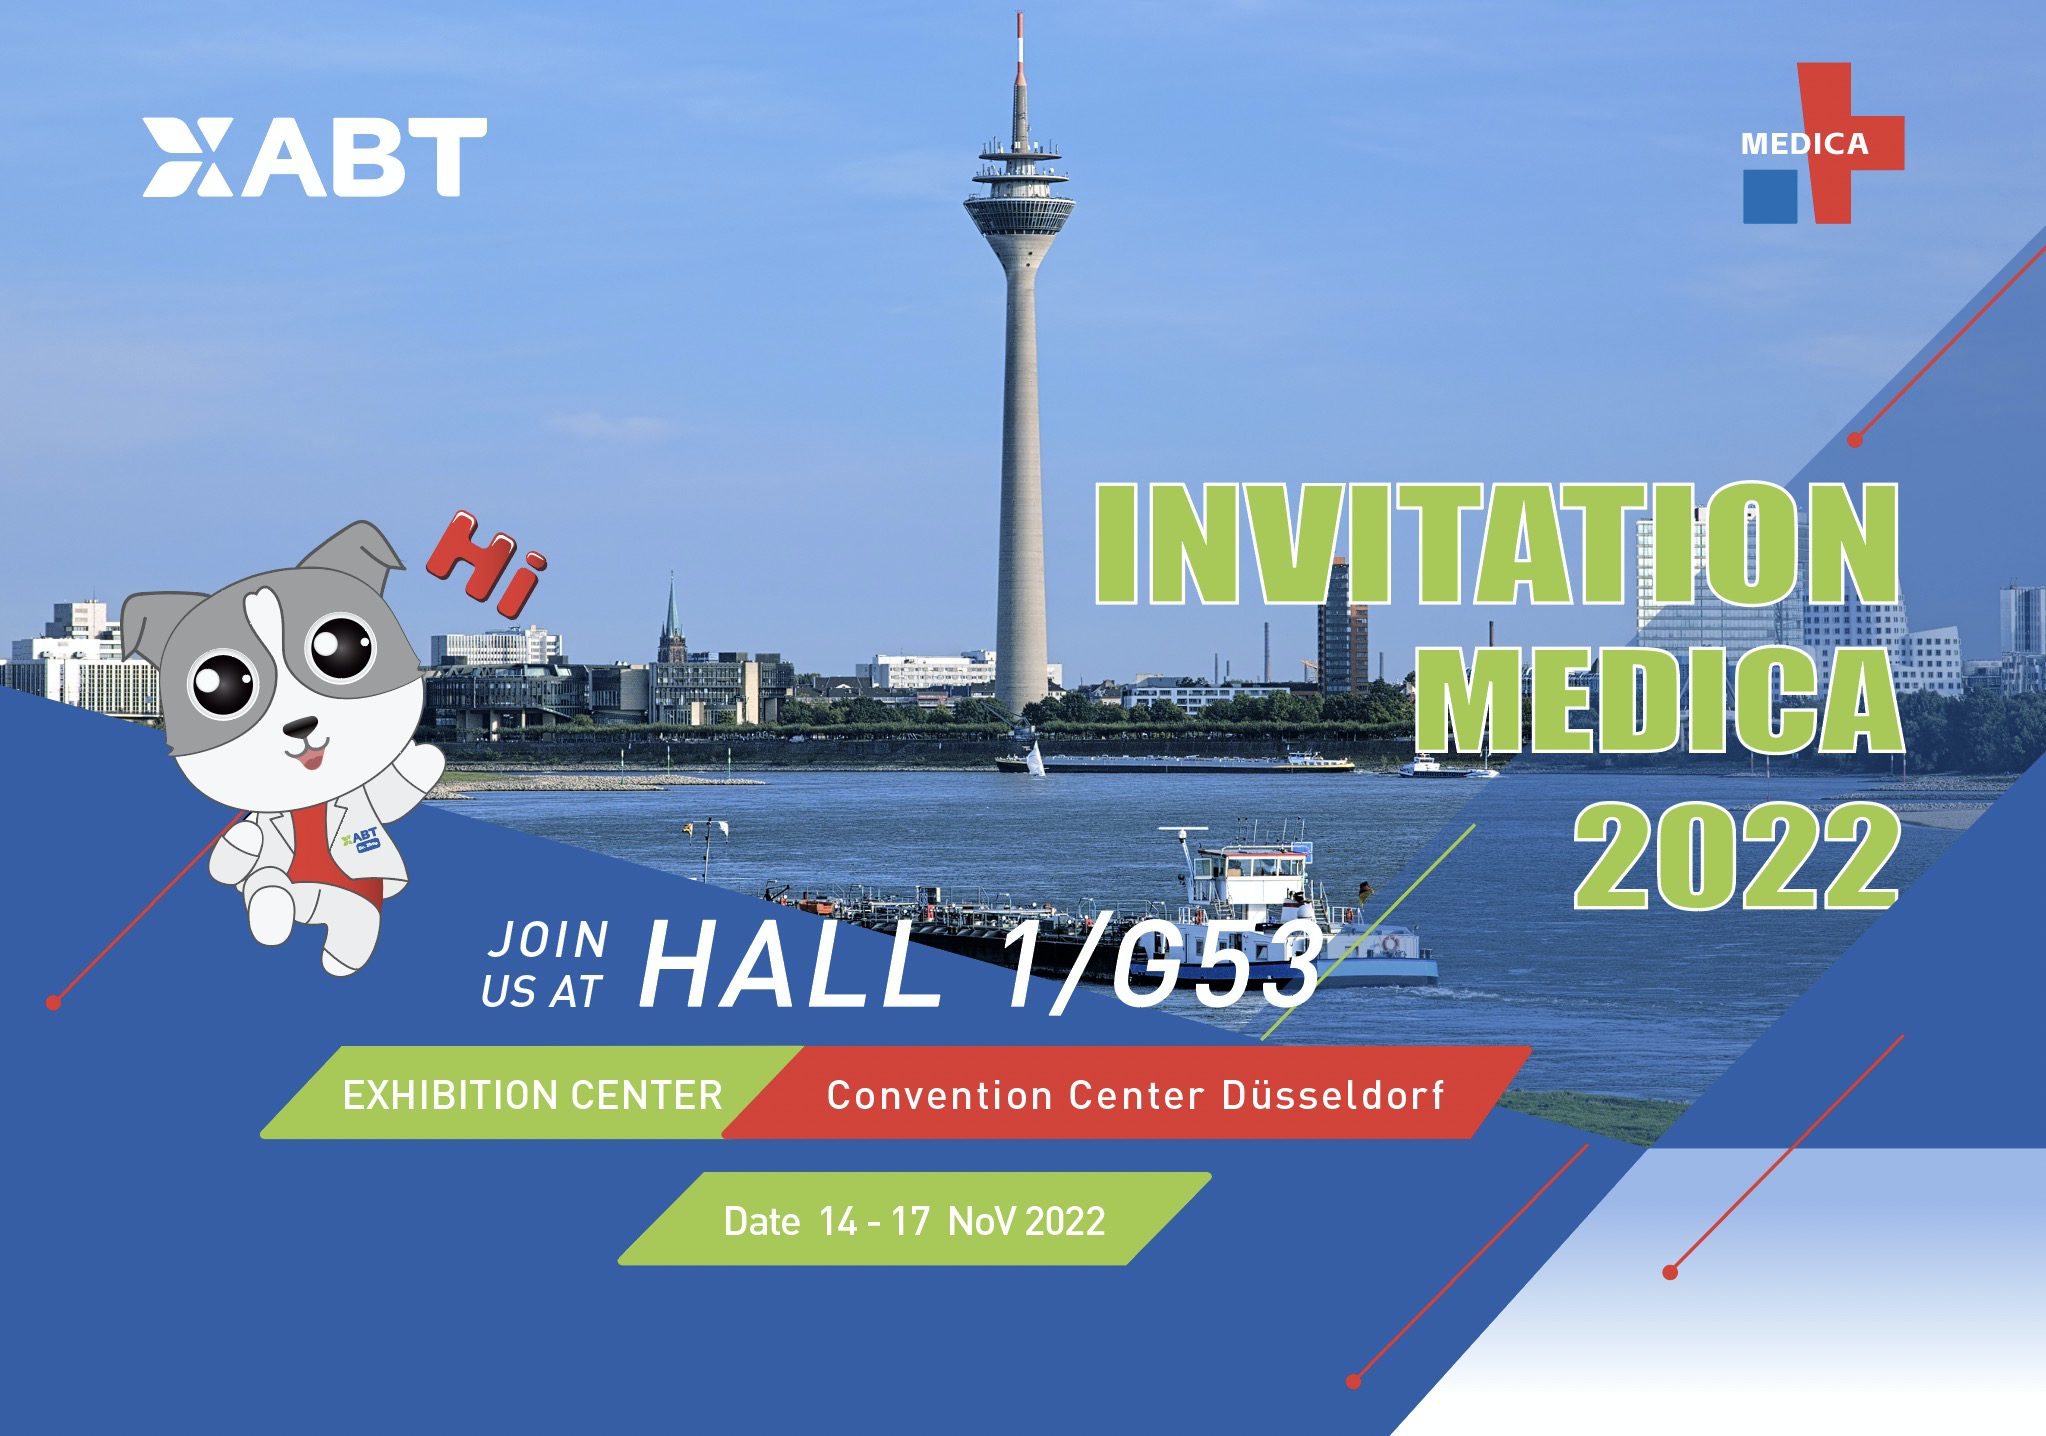 Hello again! Join us at MEDICA 2022 Dusseldorf